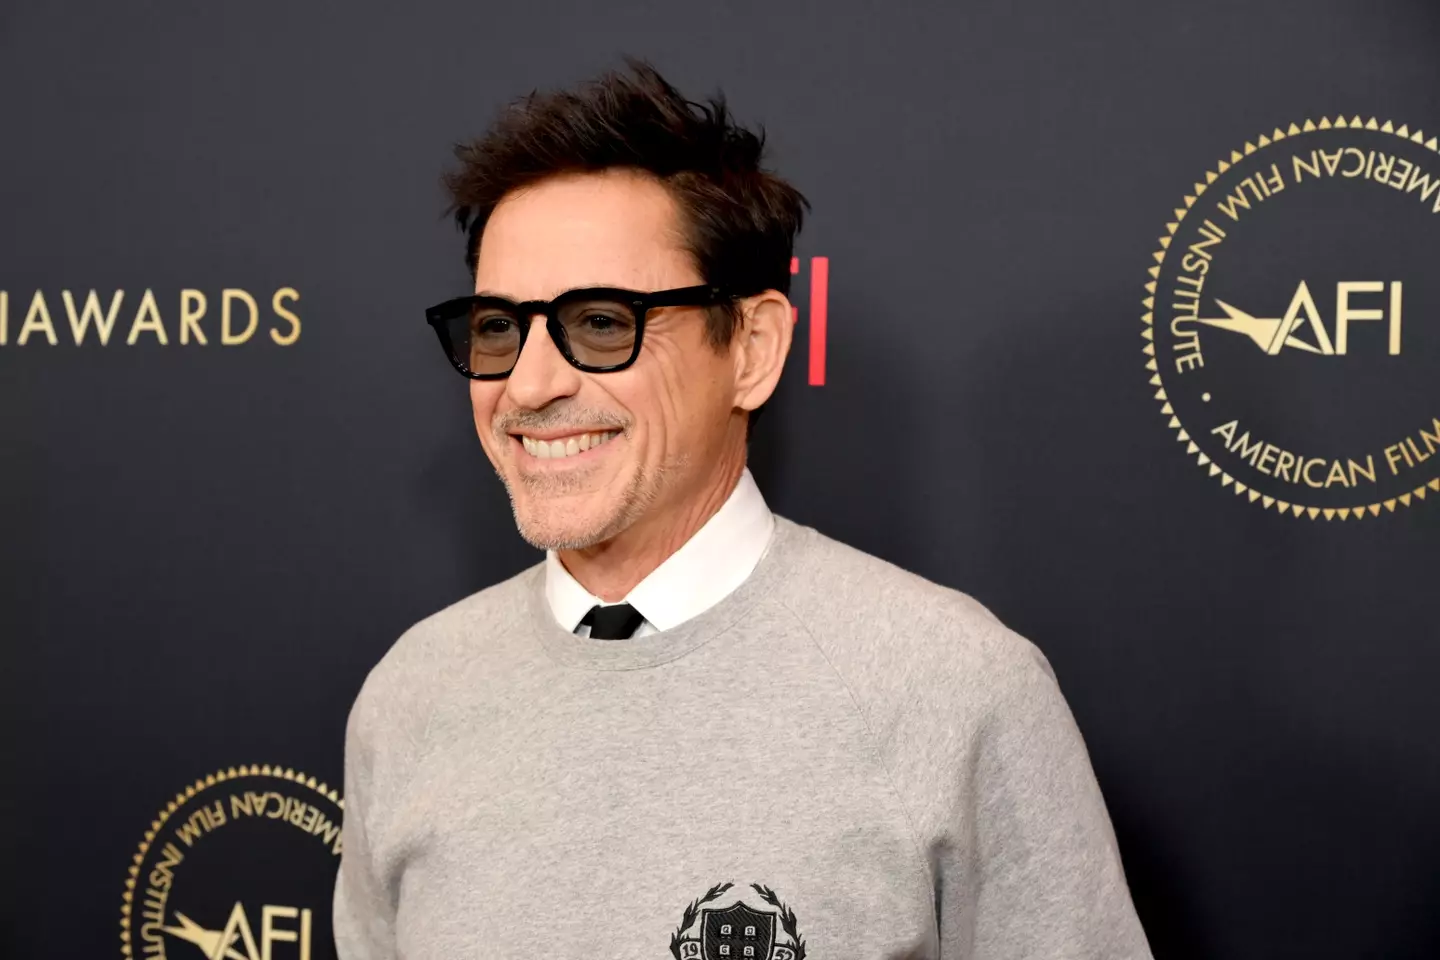 Robert Downey Jr. said some of his best performances went 'unnoticed'.